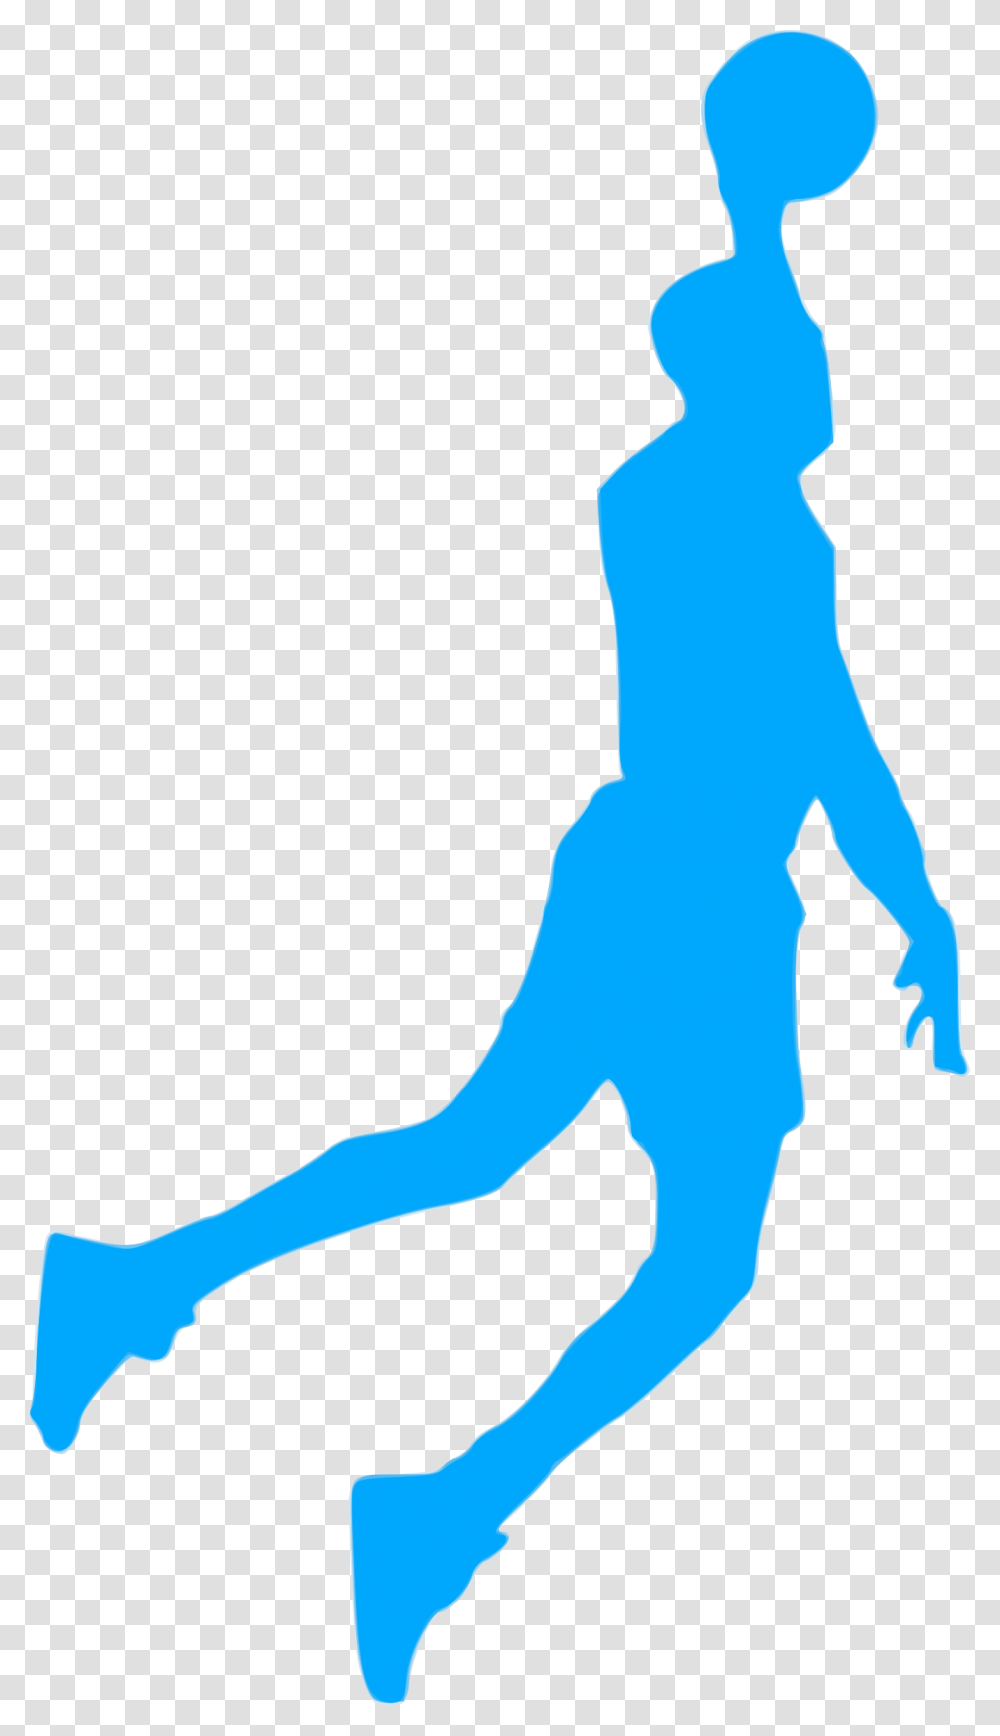 Silhouette Basket 33 Clip Arts Silhouette Basketball Player Running, Person, Outdoors, Leisure Activities, People Transparent Png